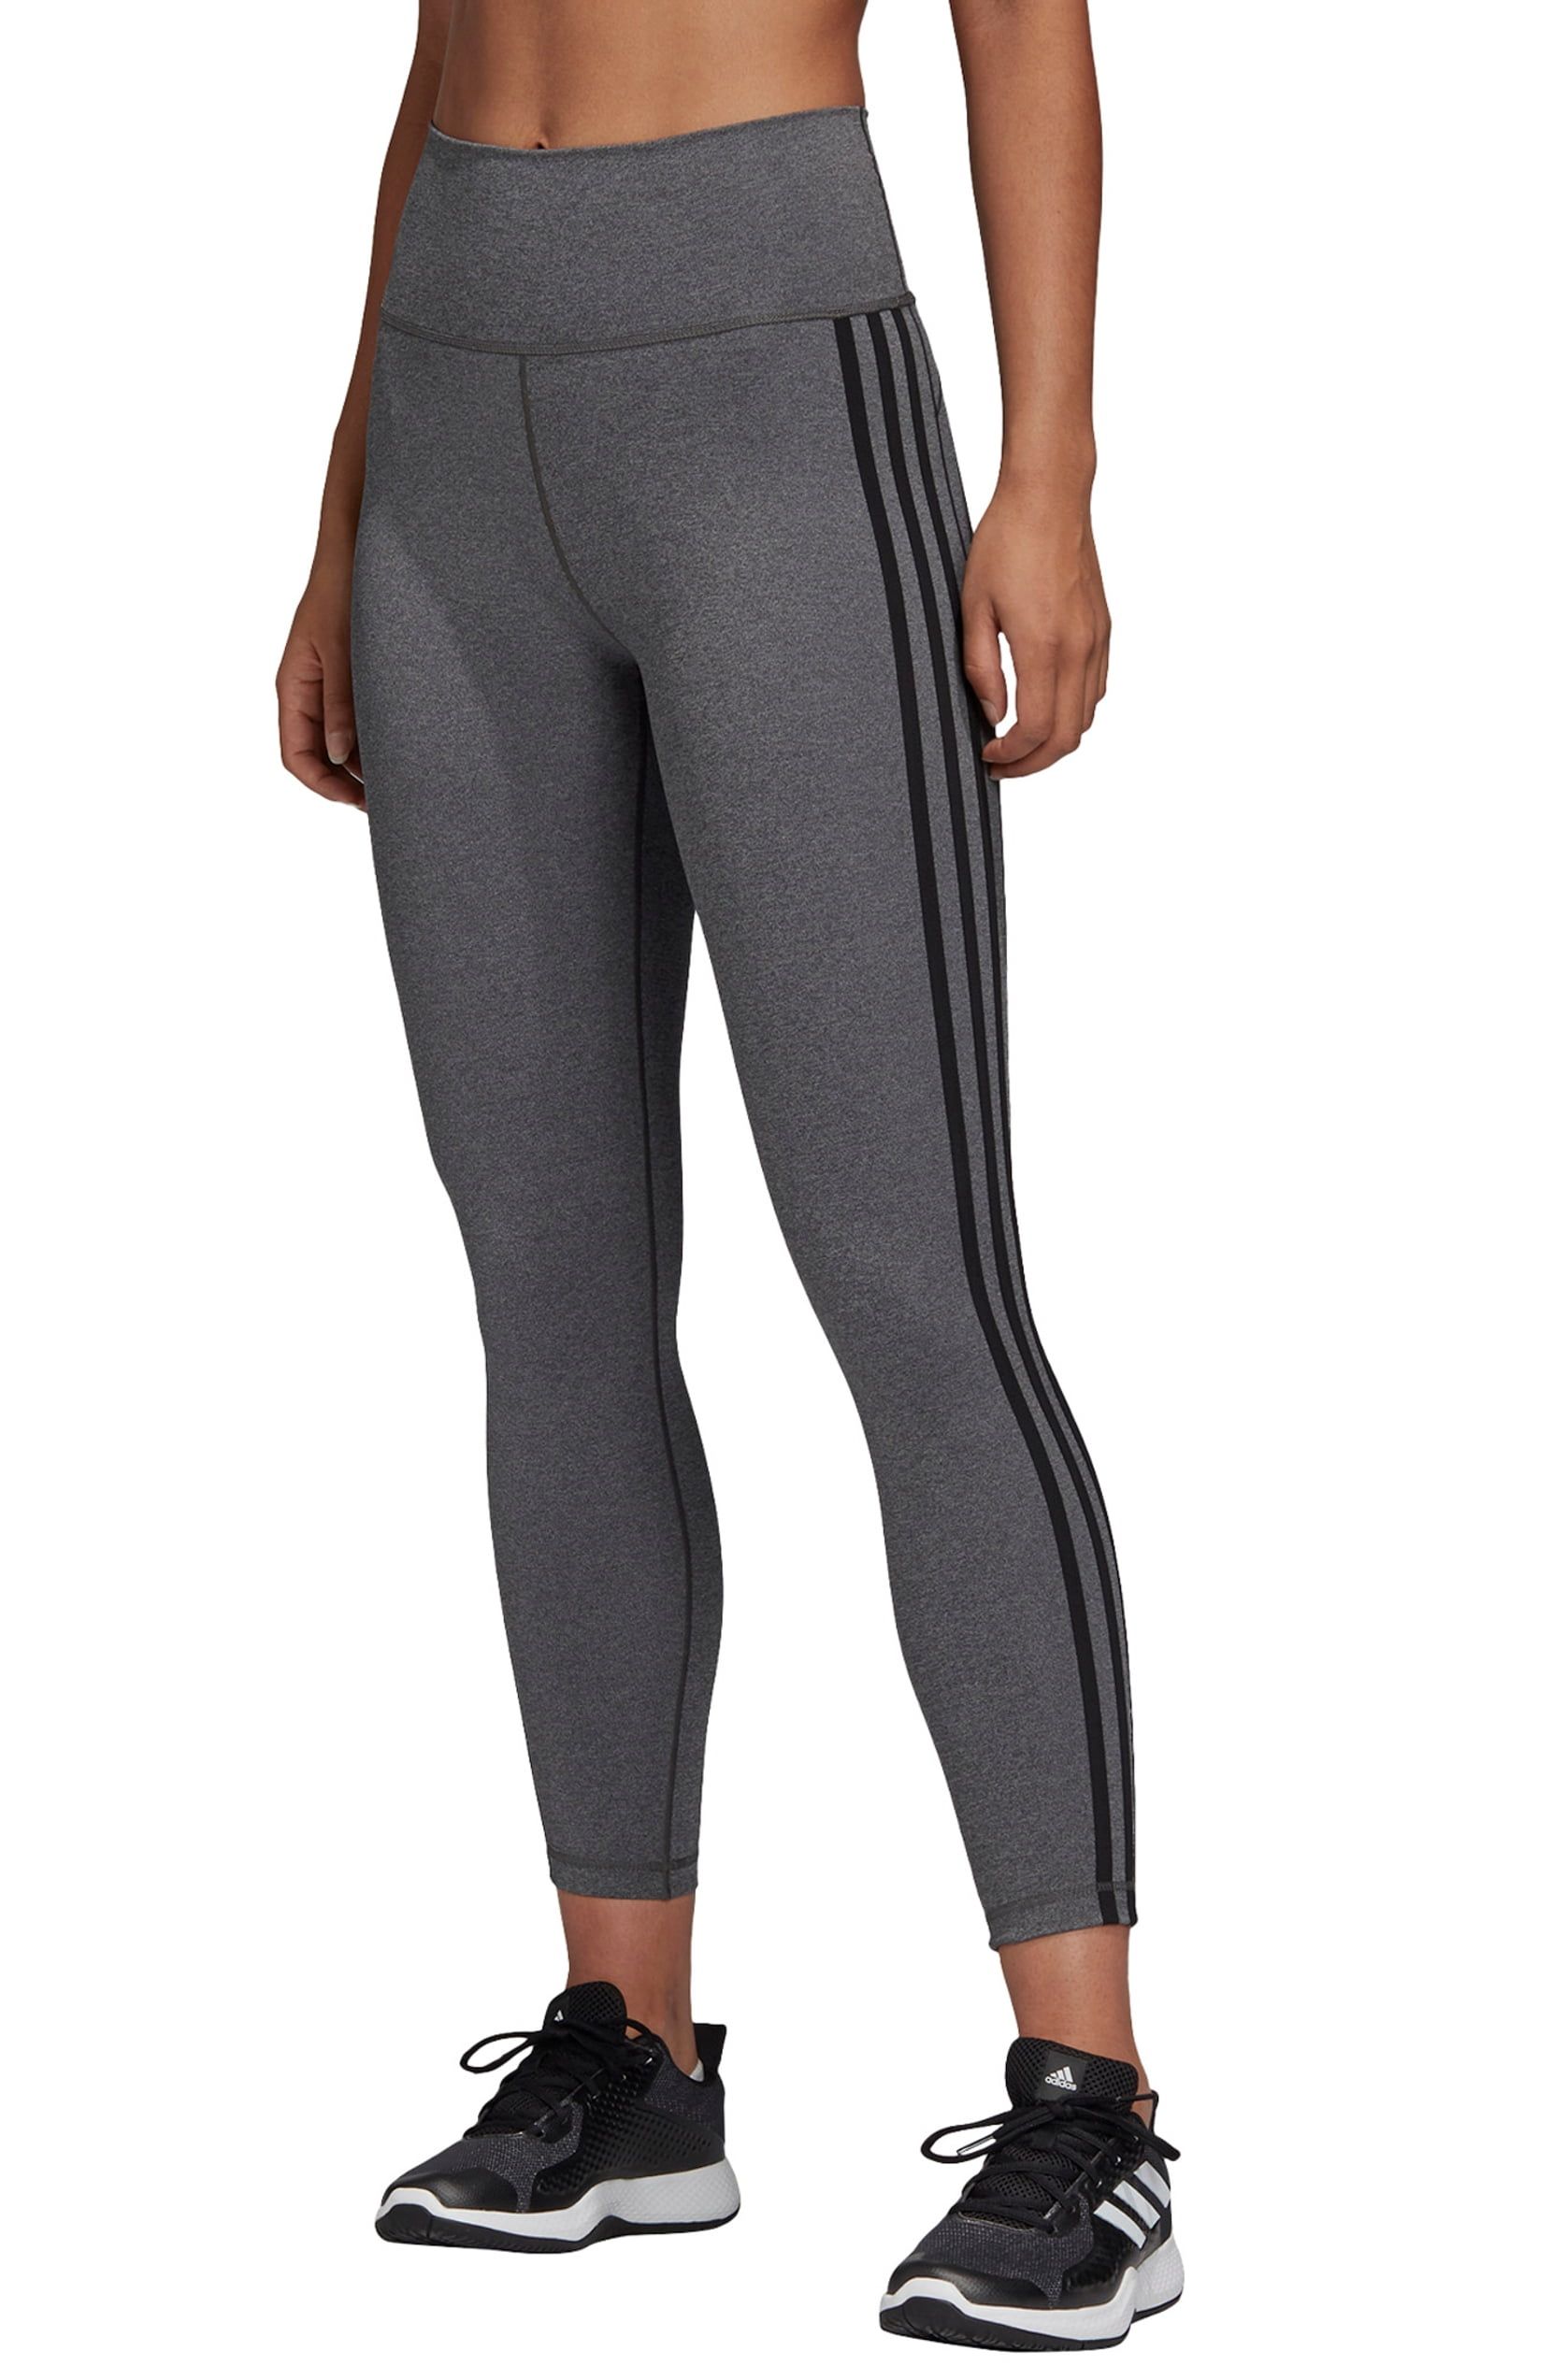 adidas Women's 3-Stripe Believe This 7/8 Plus Size Tights GD3681